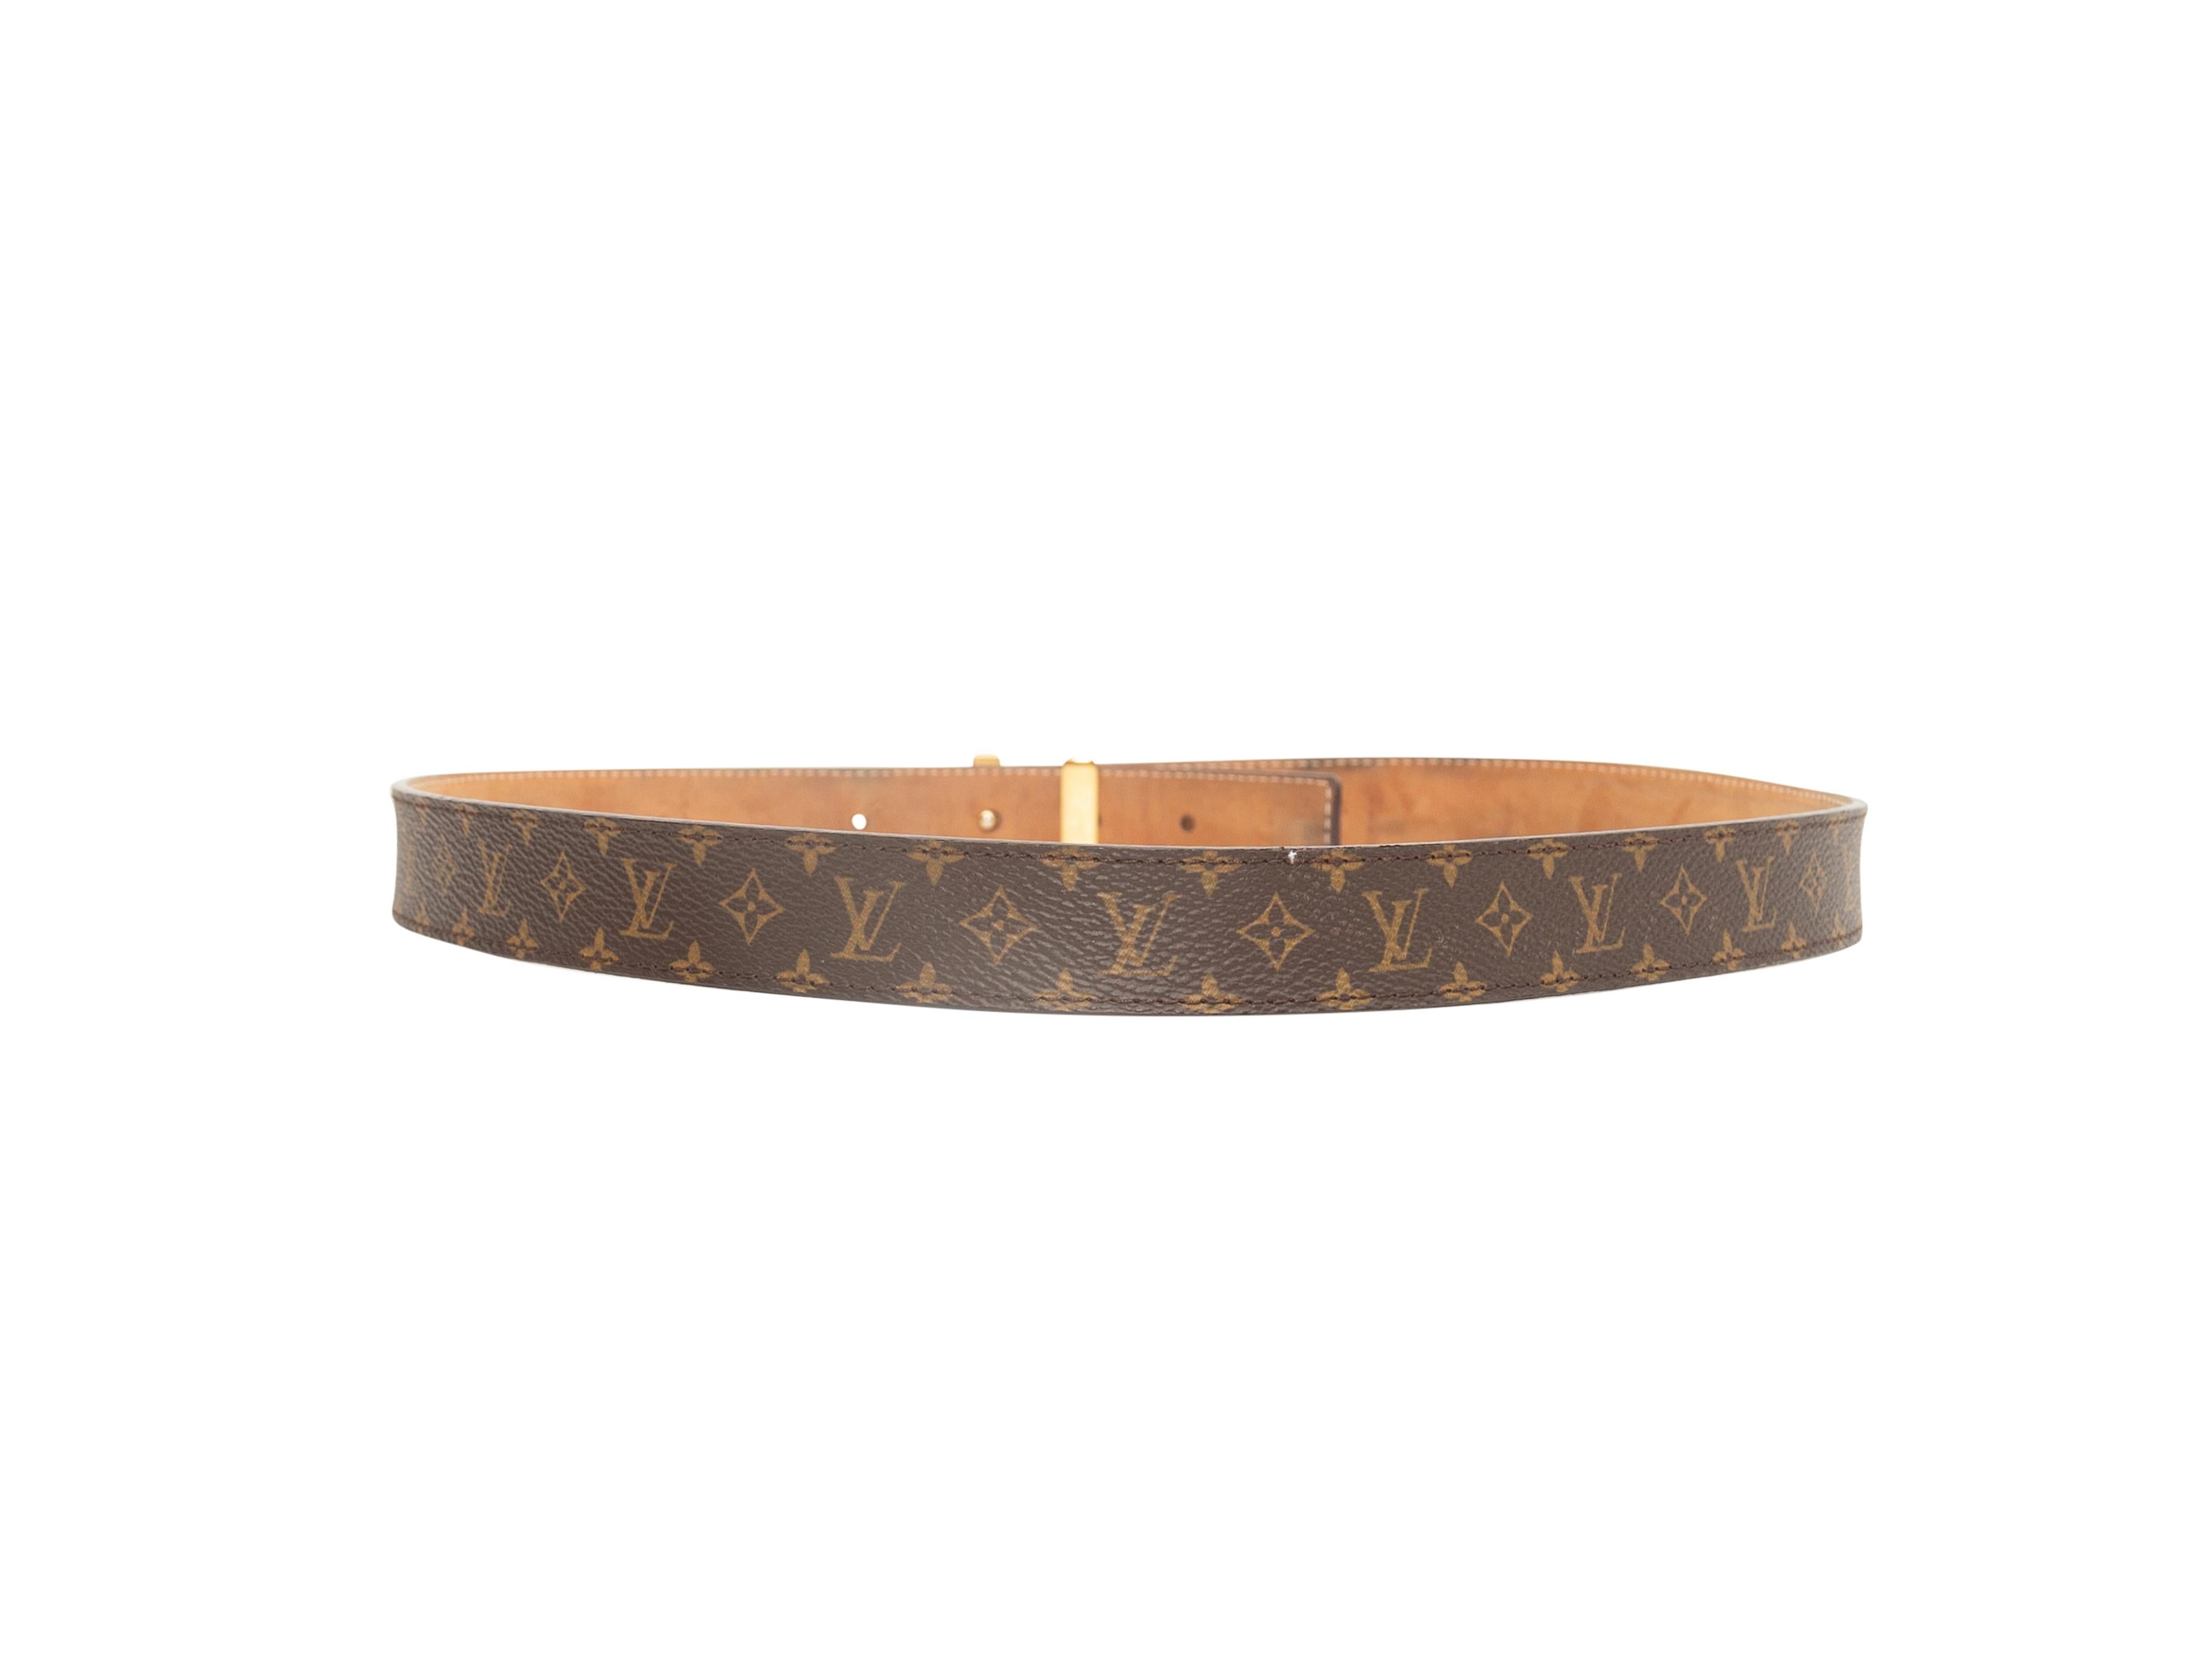 Product details: Brown monogram leather belt by Louis Vuitton. Gold-tone LV logo closure at front. 1